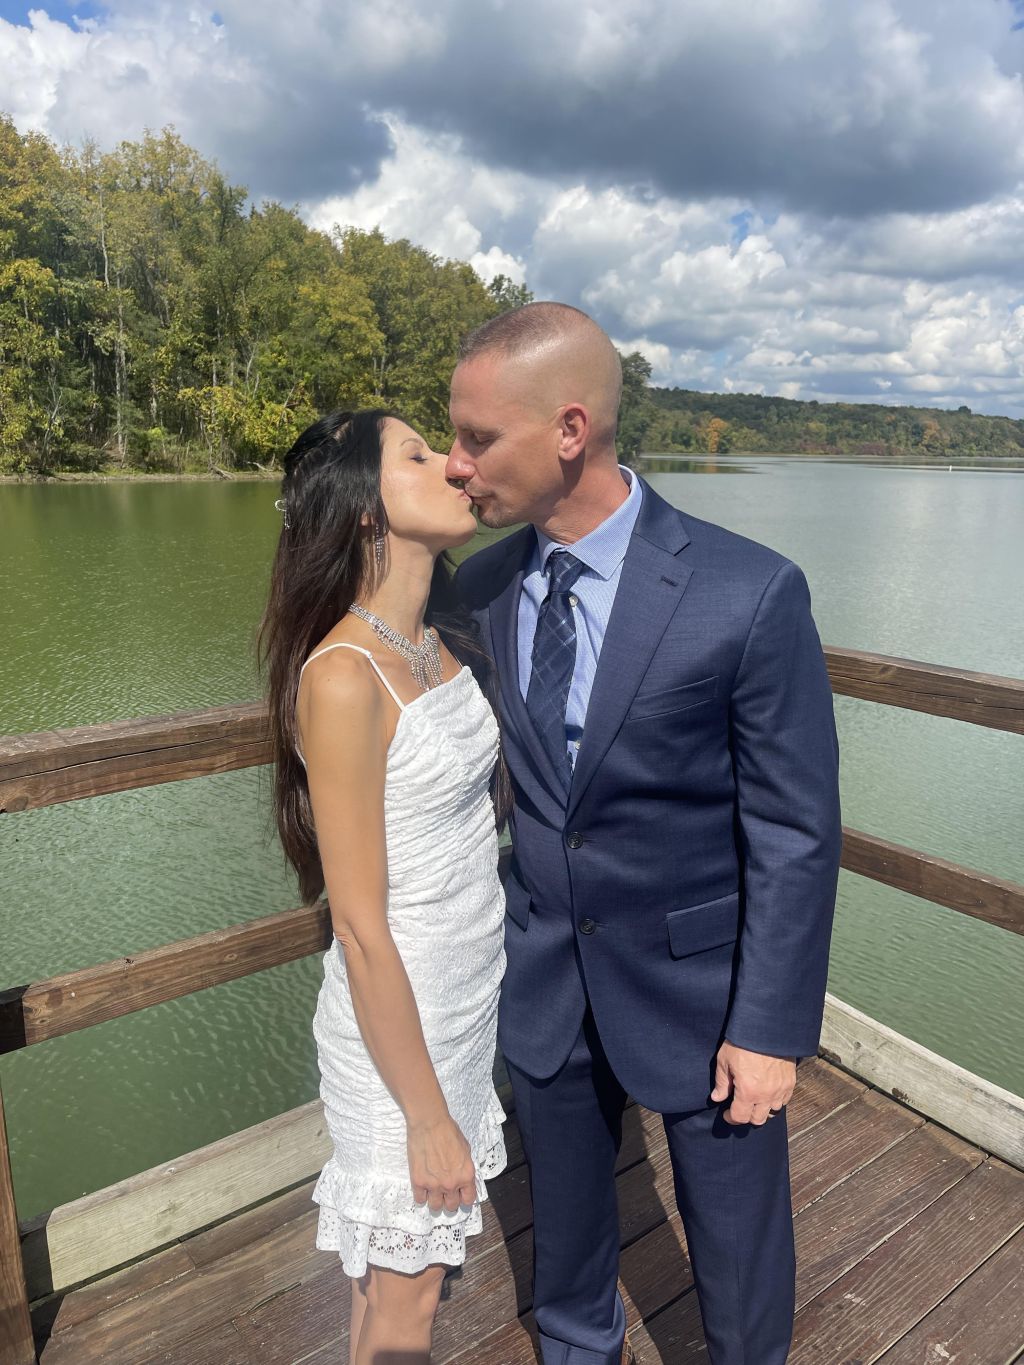 Newly married Christians kiss on a deck by a river on their wedding day